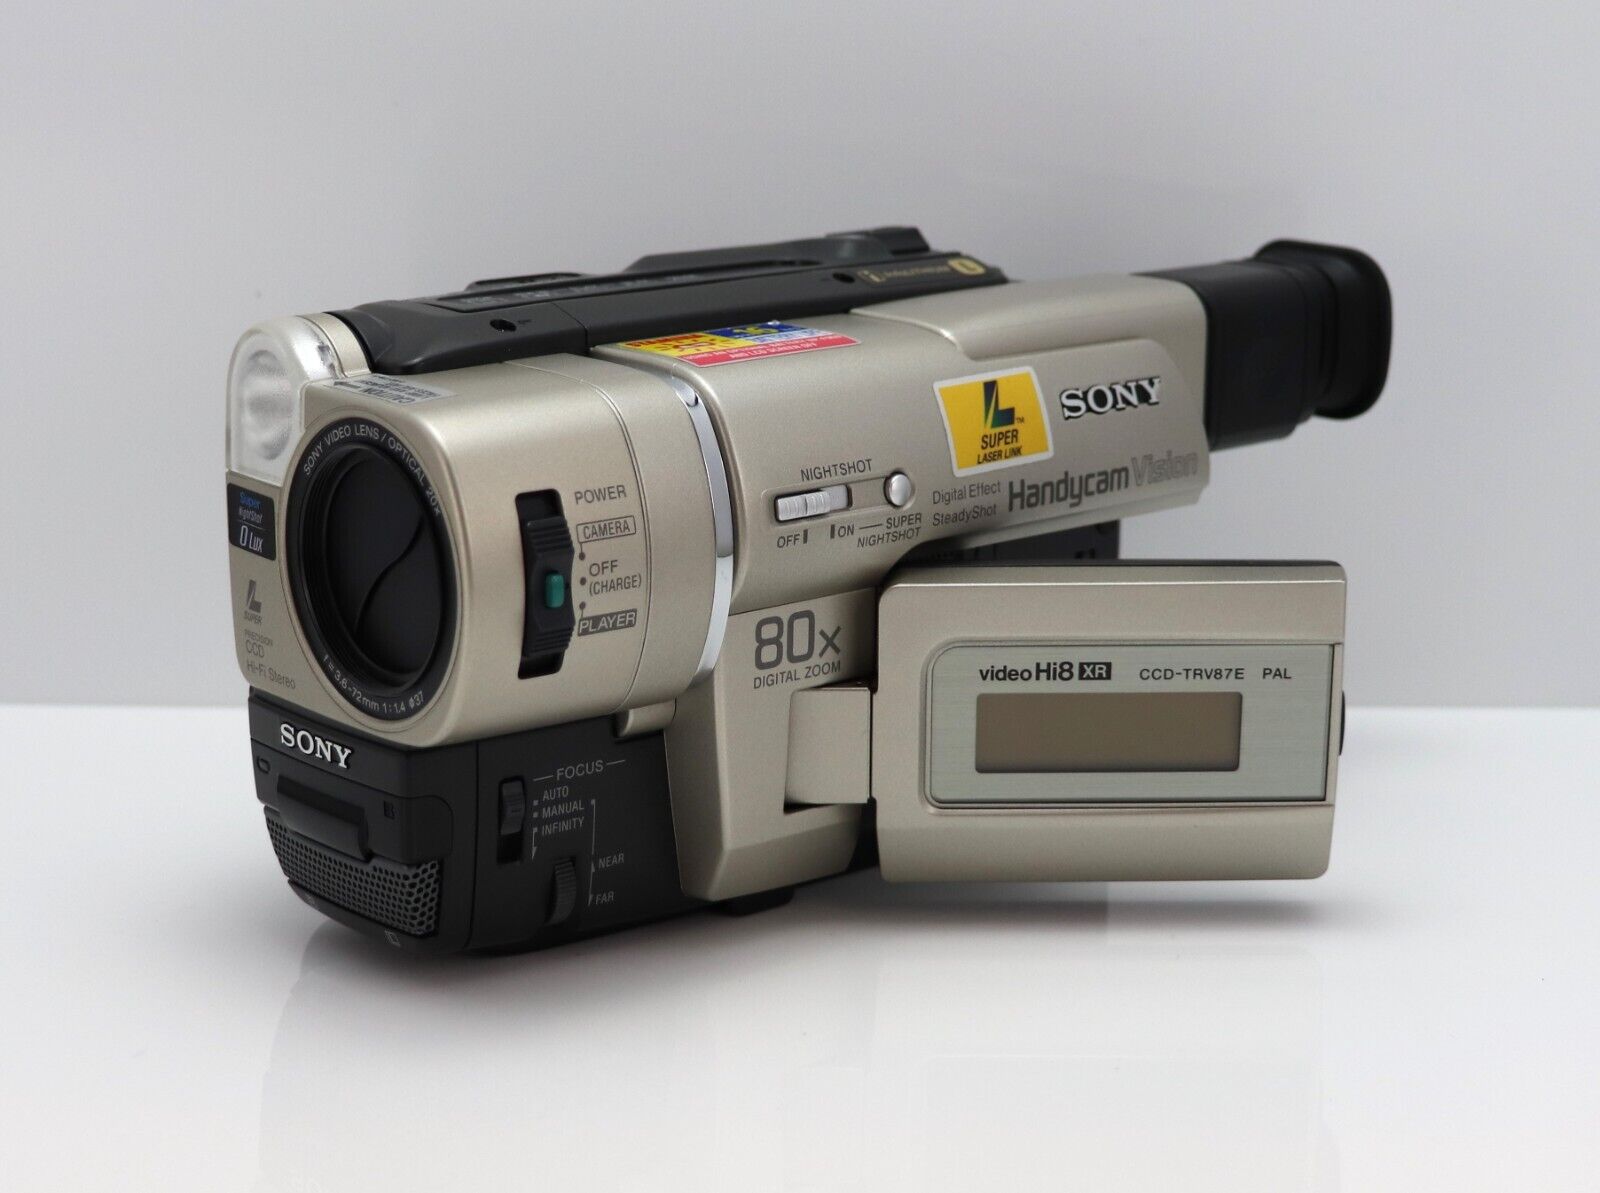 How To Get Video And Audio From Analog Camcorder